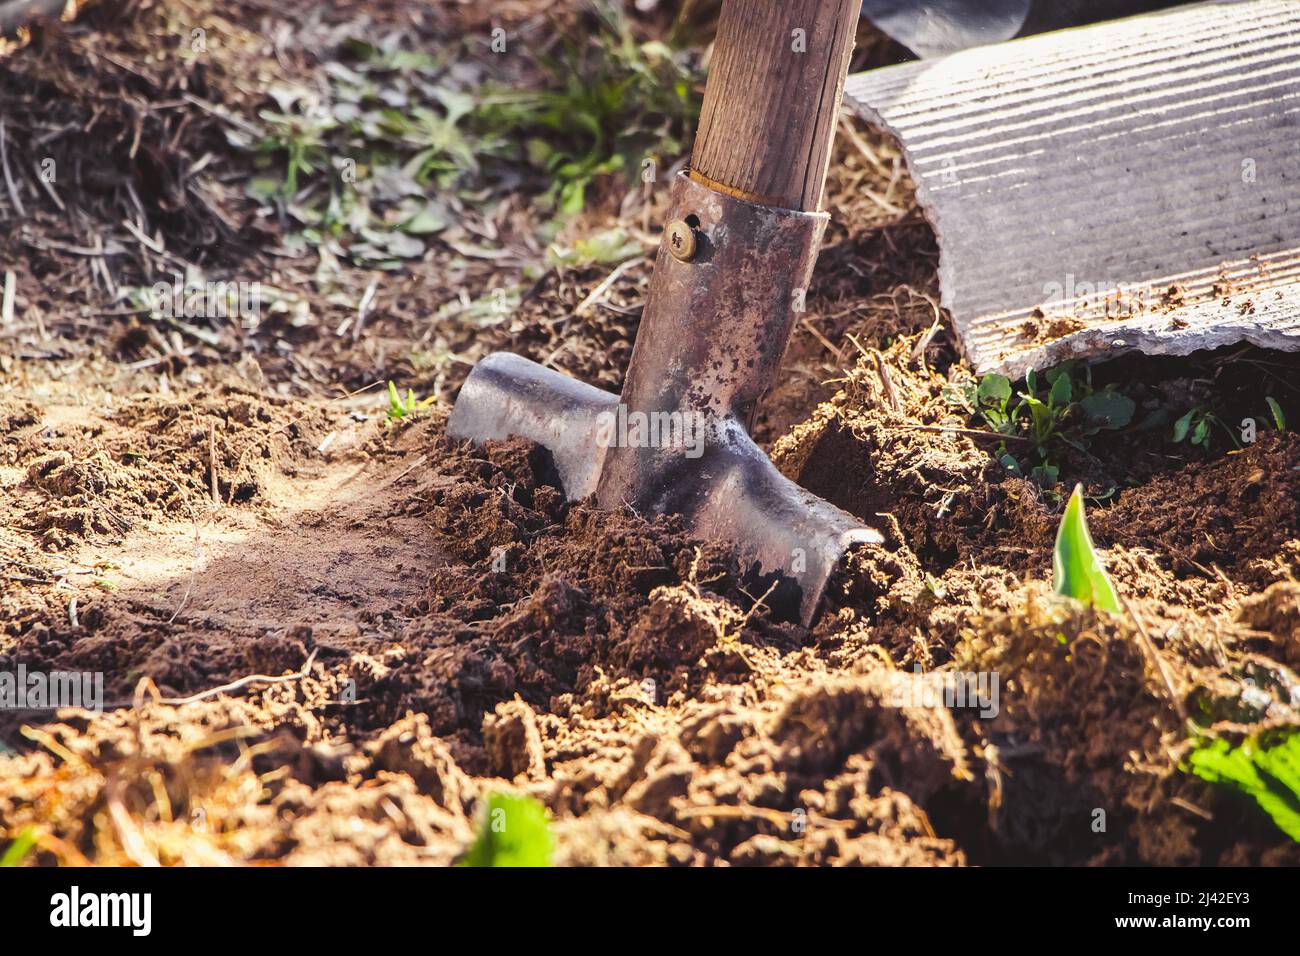 Digging up the earth with hand shovel. Gardening and planting seeds in spring. Rural life, farming. Stock Photo